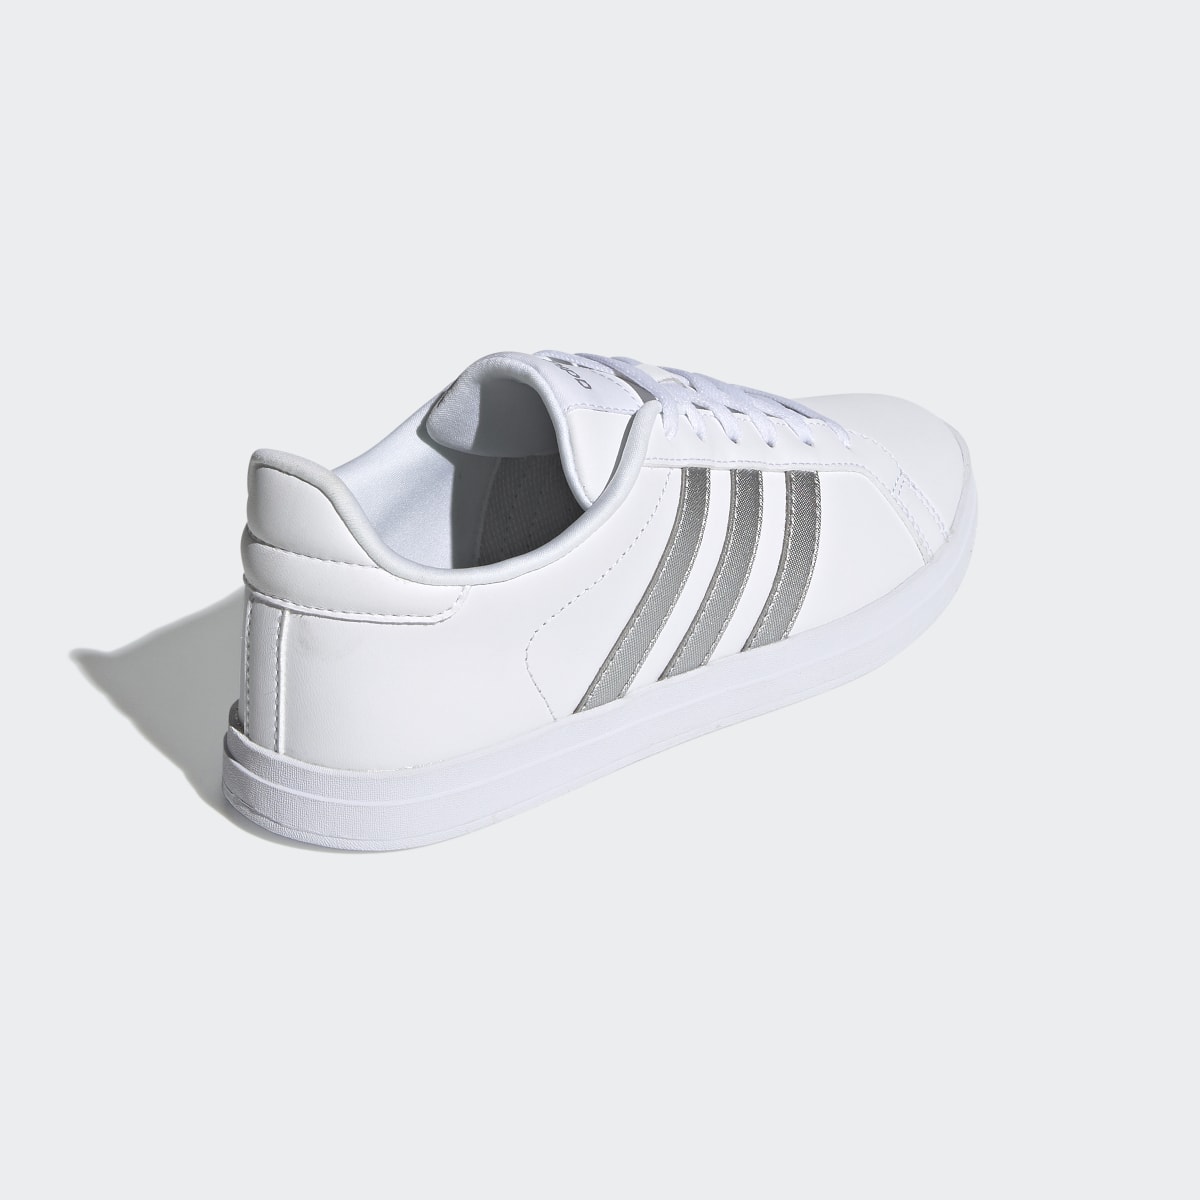 Adidas Sapatilhas Courtpoint. 6